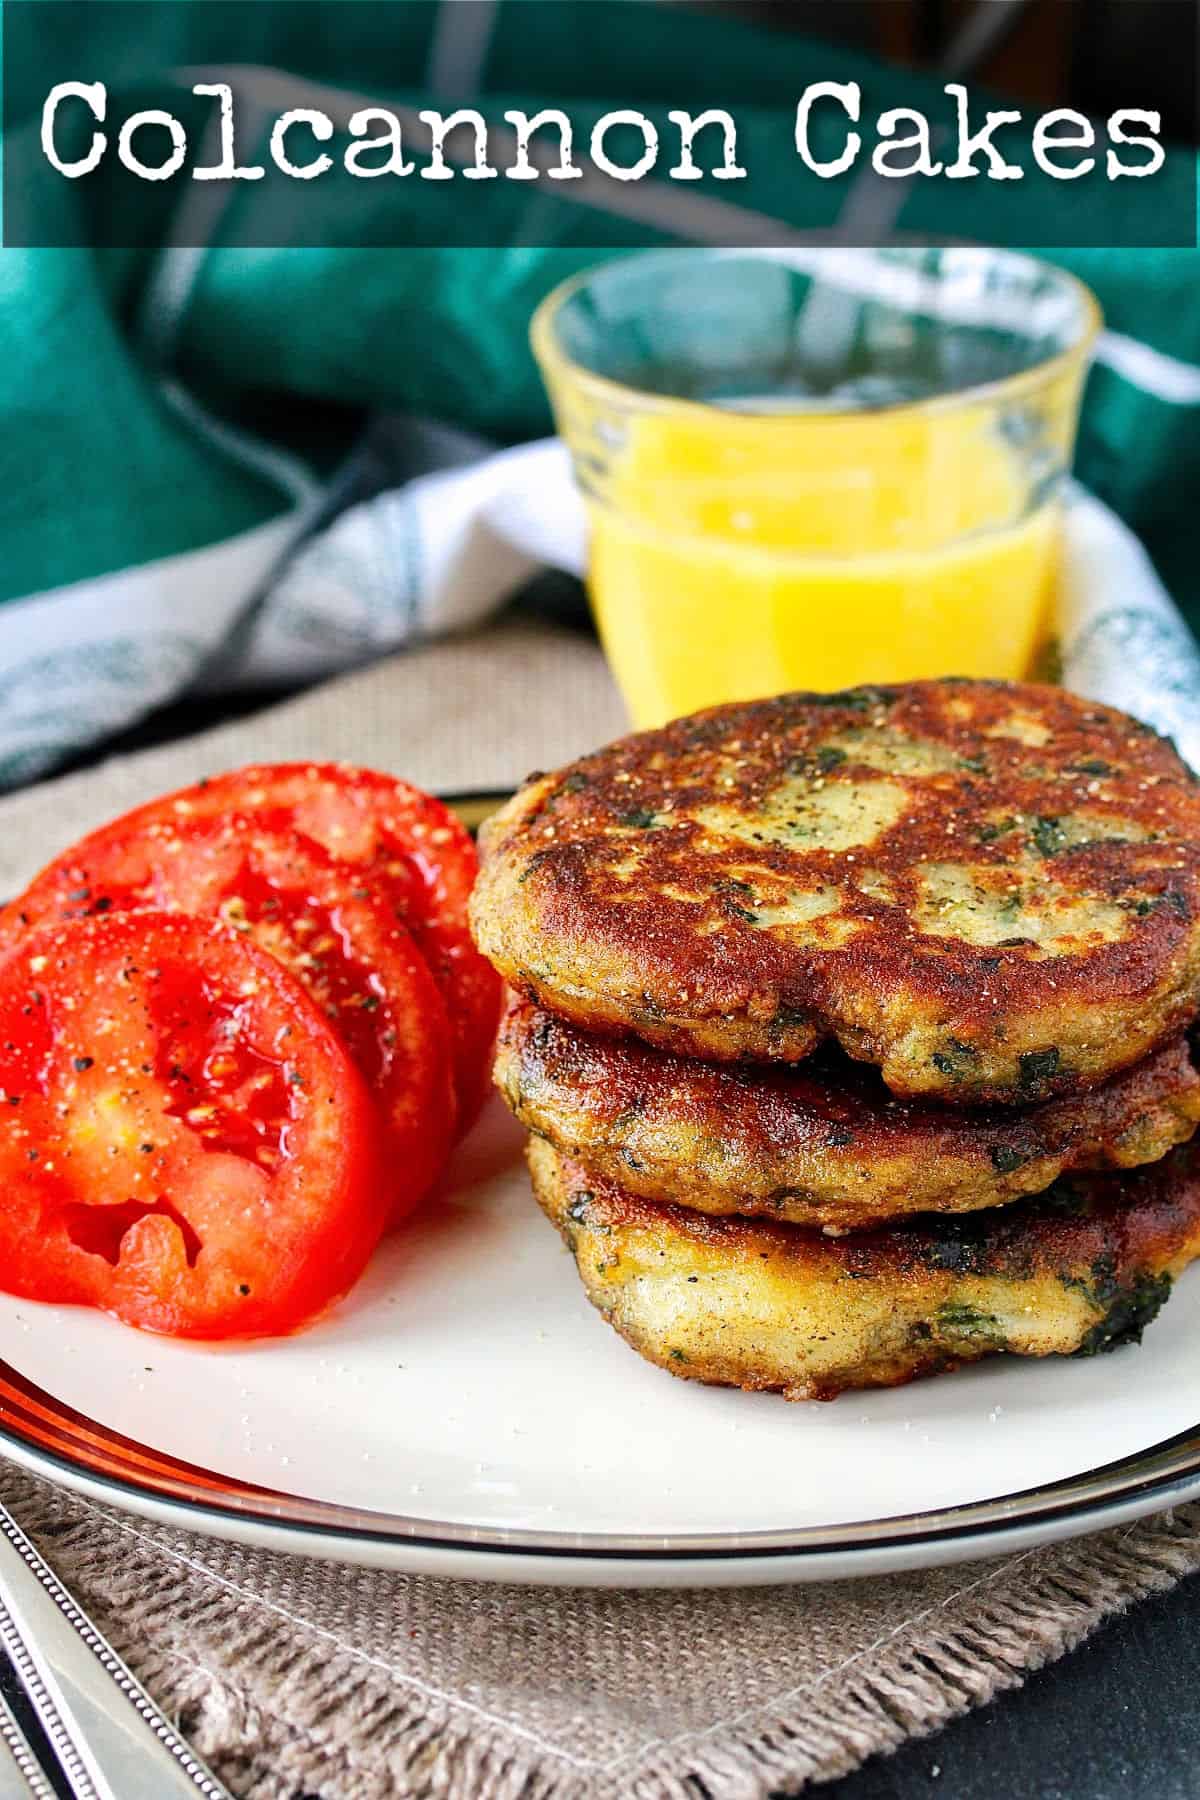 Colcannon Cakes on a plate with tomatoes.